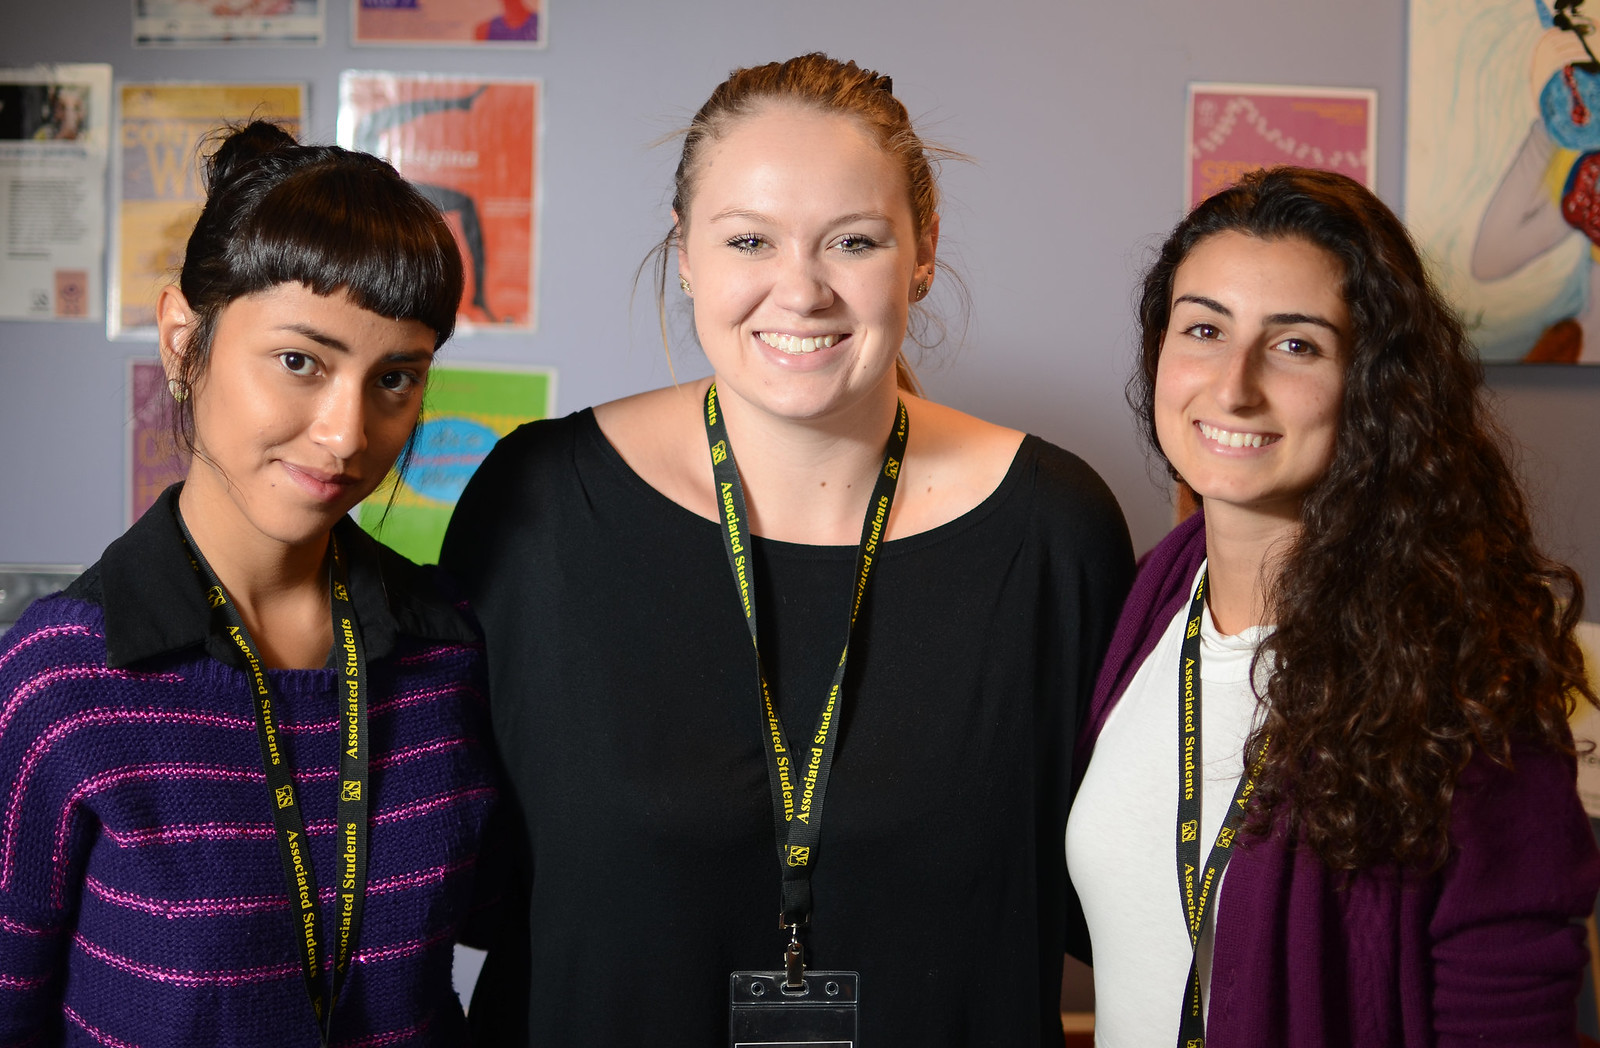 The Women's Center, which recently opened its doors, hired all new staff to run the center which is located located on the terrace level of the Cesar Chavez Student Center in room T-116. Analleli Gallardo (left) is the new office assistant, Brooke Glasky (center) is the new director, and Shani Winston (right) is the new assistant director. Photo by Virginia Tieman / Xpress